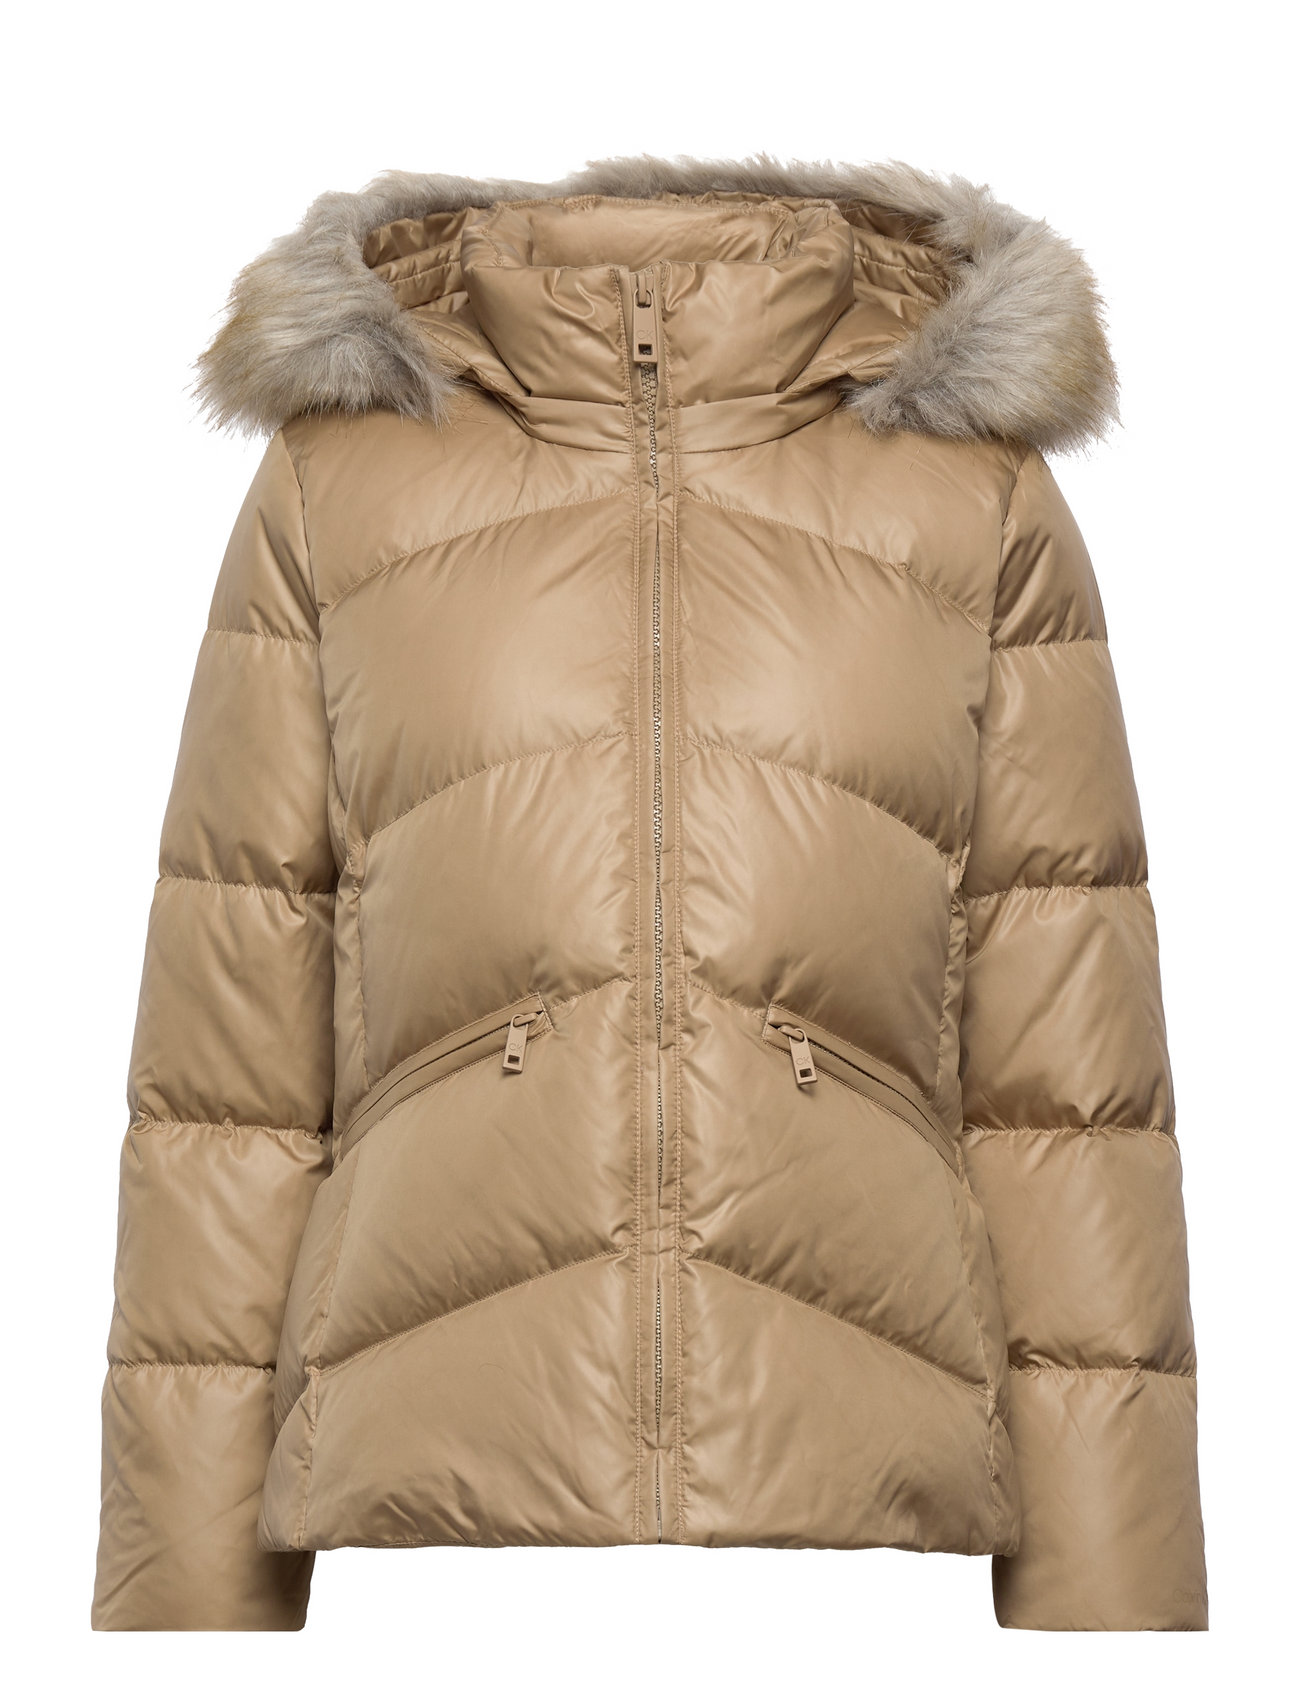 Calvin Klein Essential Real Down Jacket - 349.90 €. Buy Down- & padded  jackets from Calvin Klein online at Boozt.com. Fast delivery and easy  returns